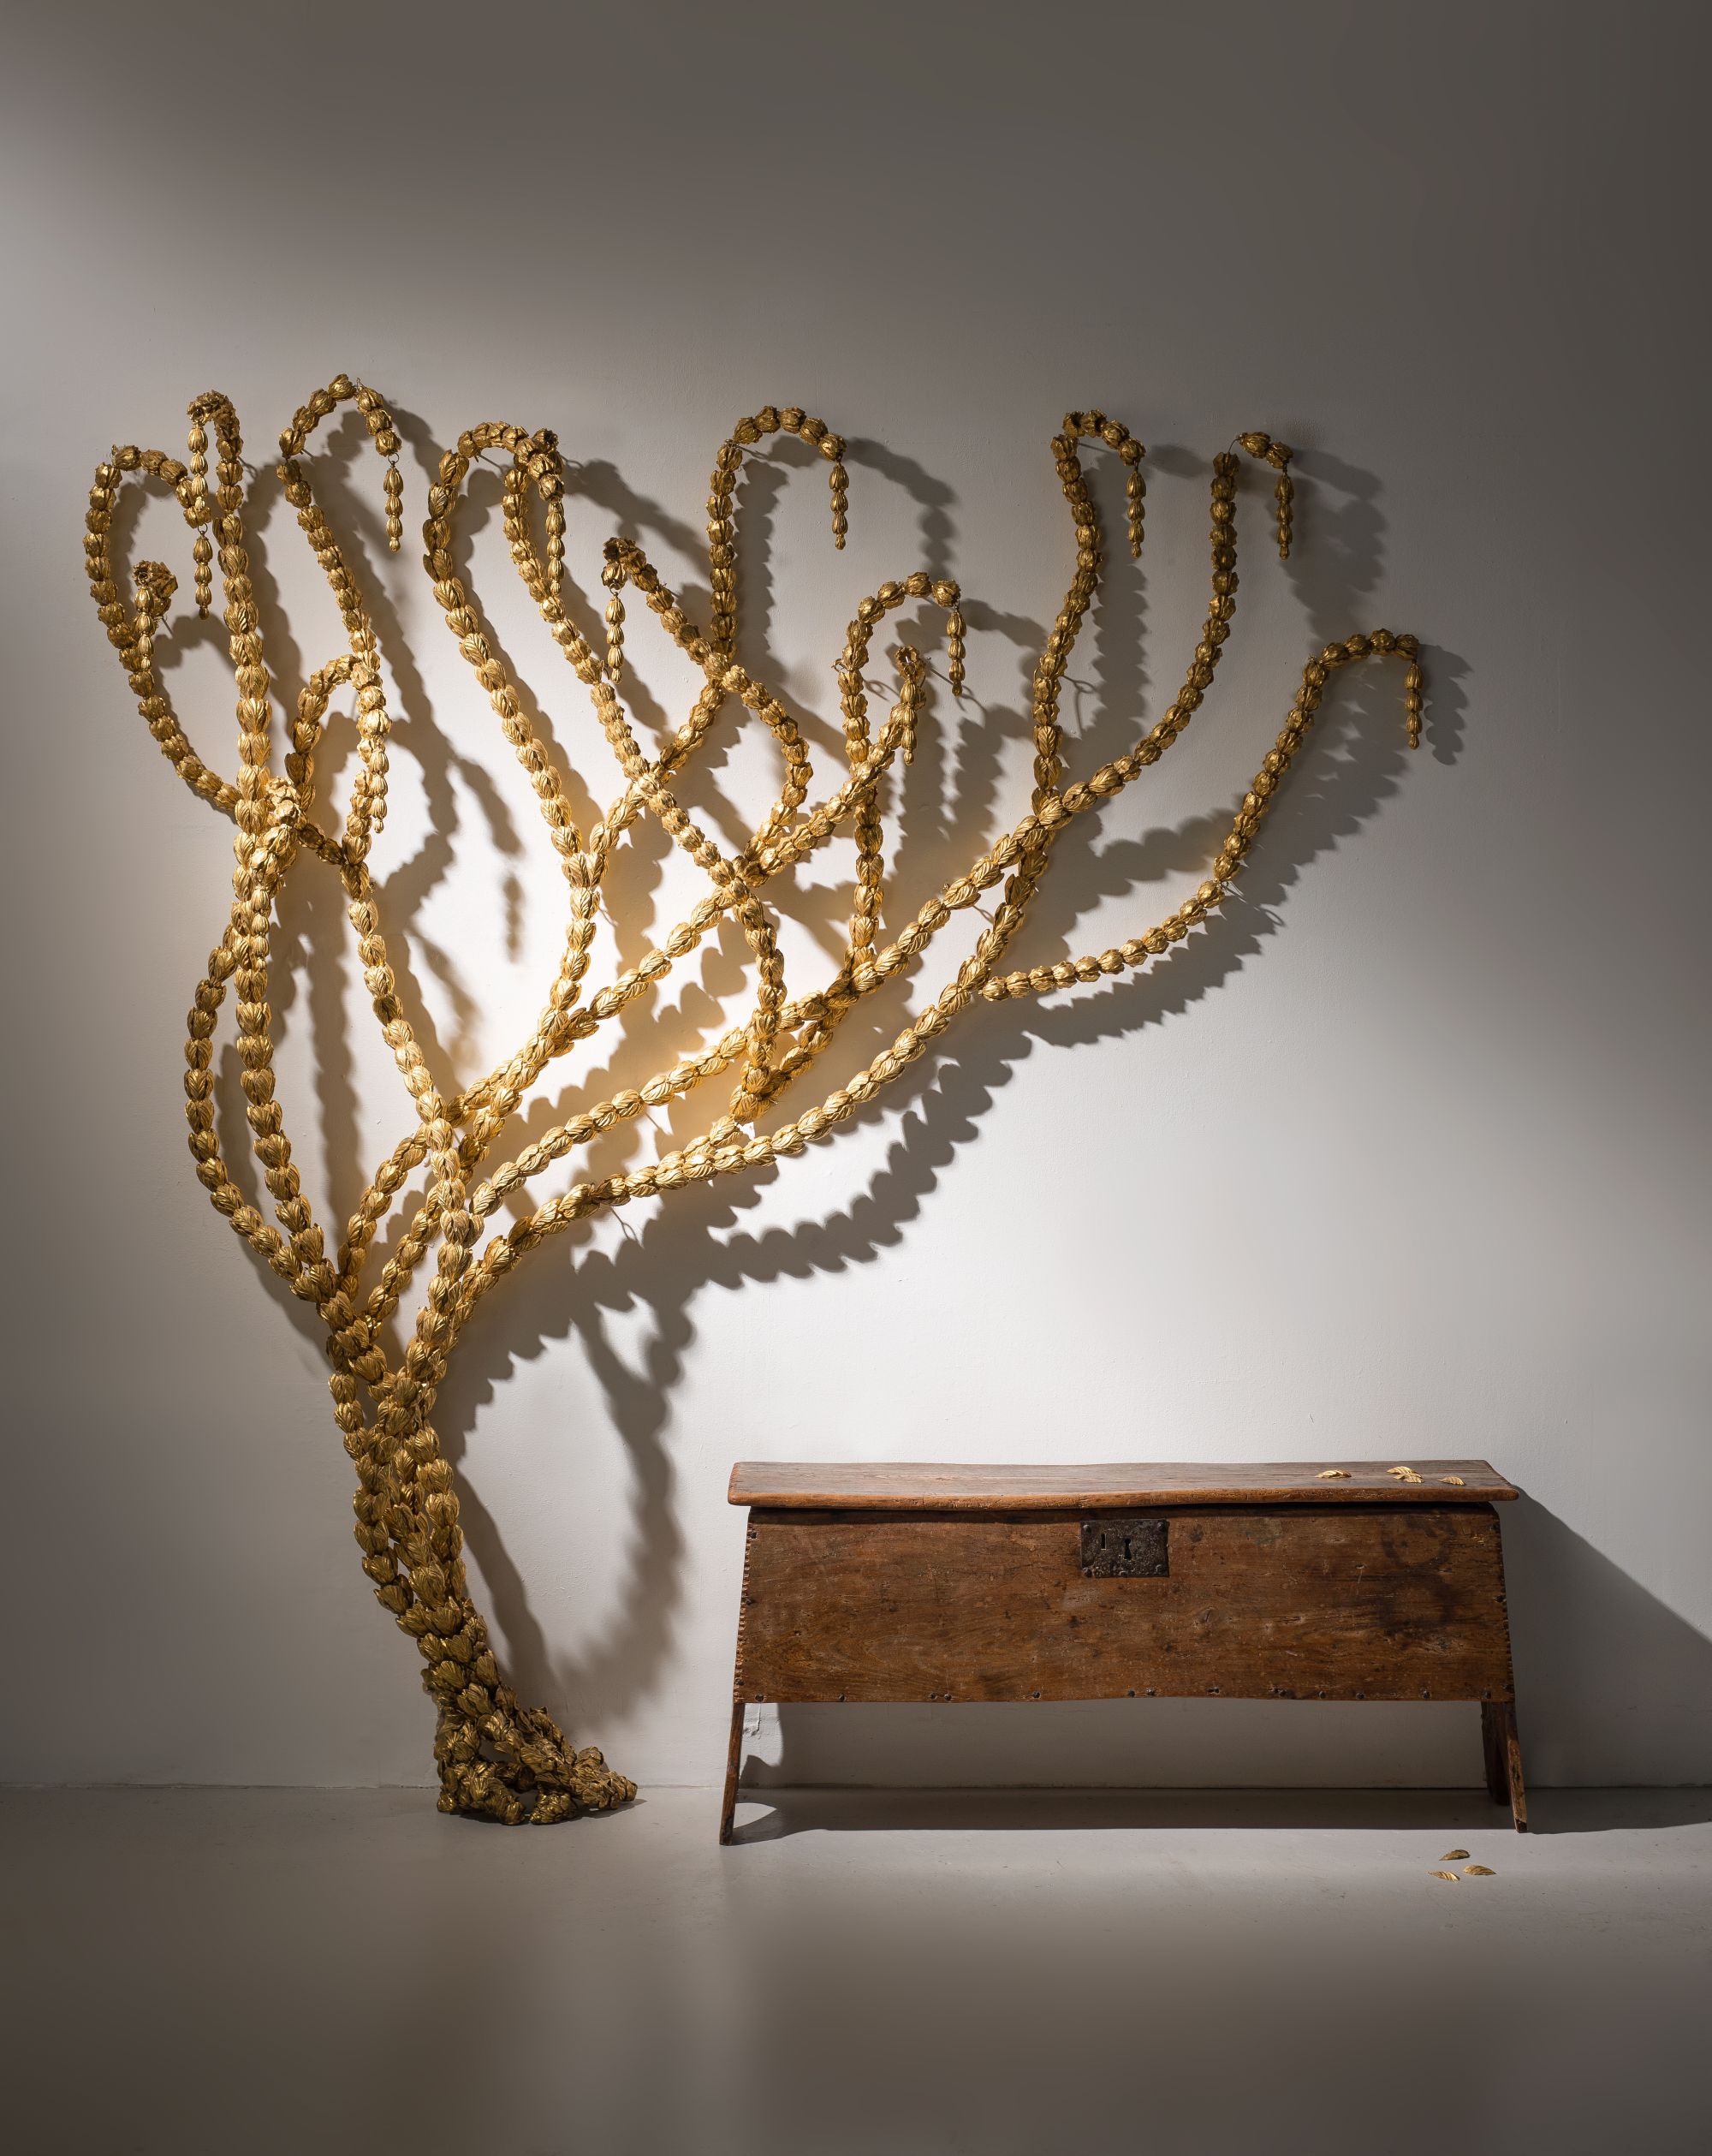 Vine by Sophie Coryndon a wall sculpture comprising gilt husks, formerly exhibited at the Royal Academy of Arts in London